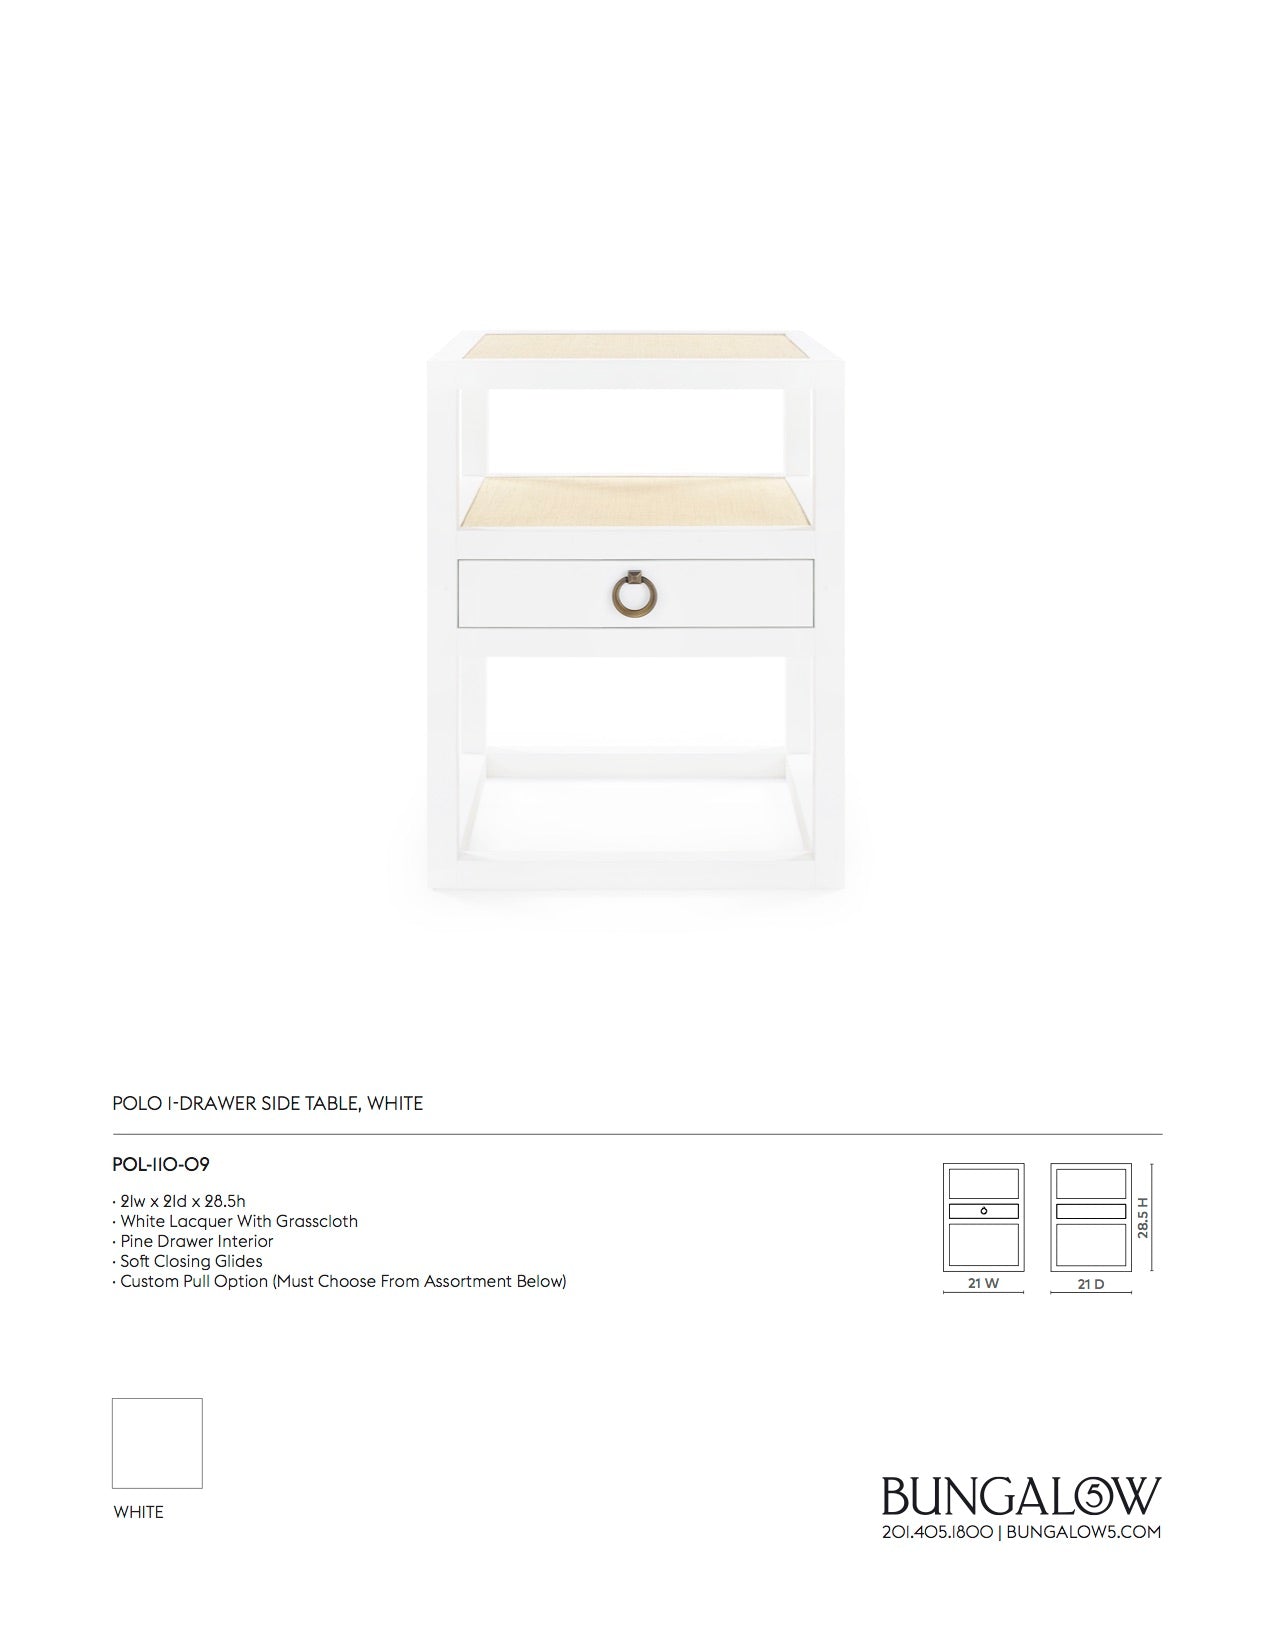 Bungalow 5 Polo 1 Drawer Side Table Grasscloth and White Lacquer Tearsheet